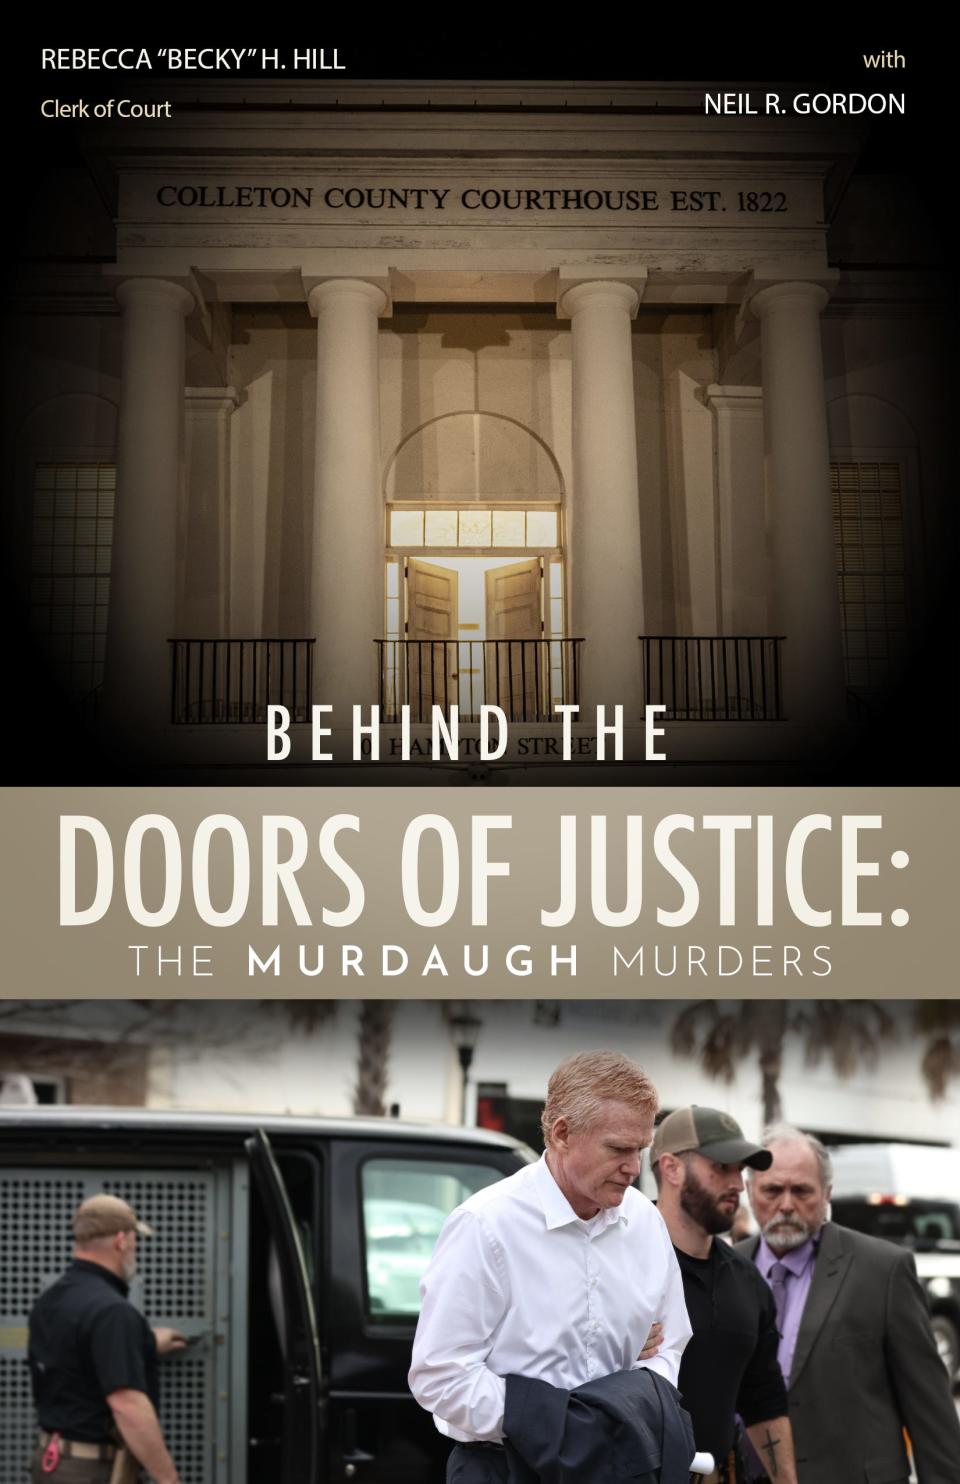 The cover of Behind the Doors of Justice: The Murdaugh Murders.